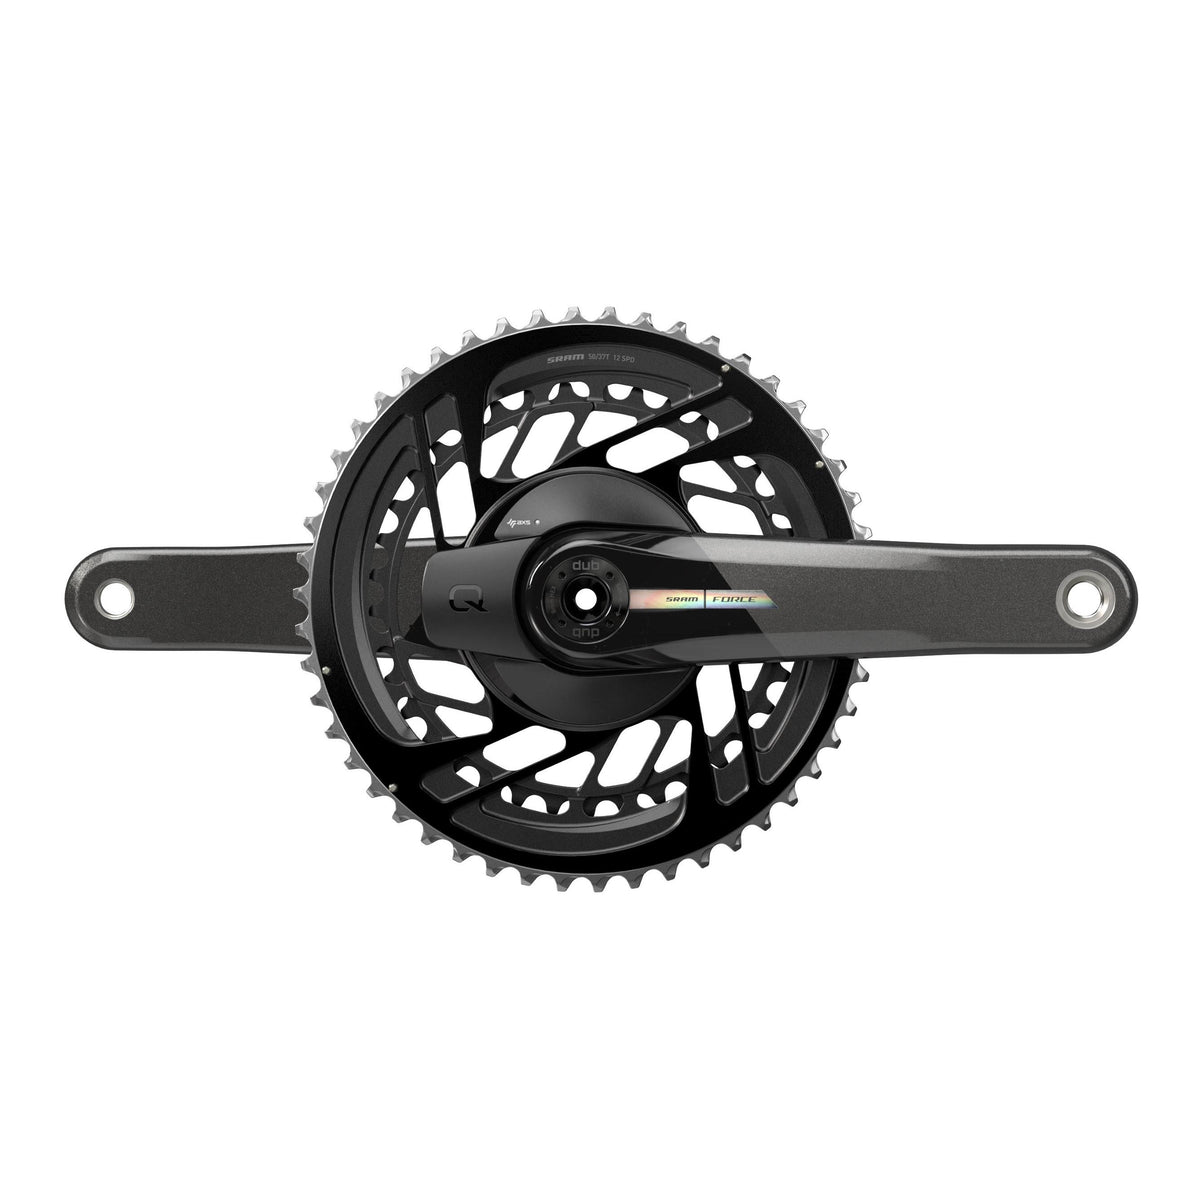 SRAM Force D2 Road Power Meter Spider DUB - 50/37T Direct Mount (BB Not Included) 165MM 